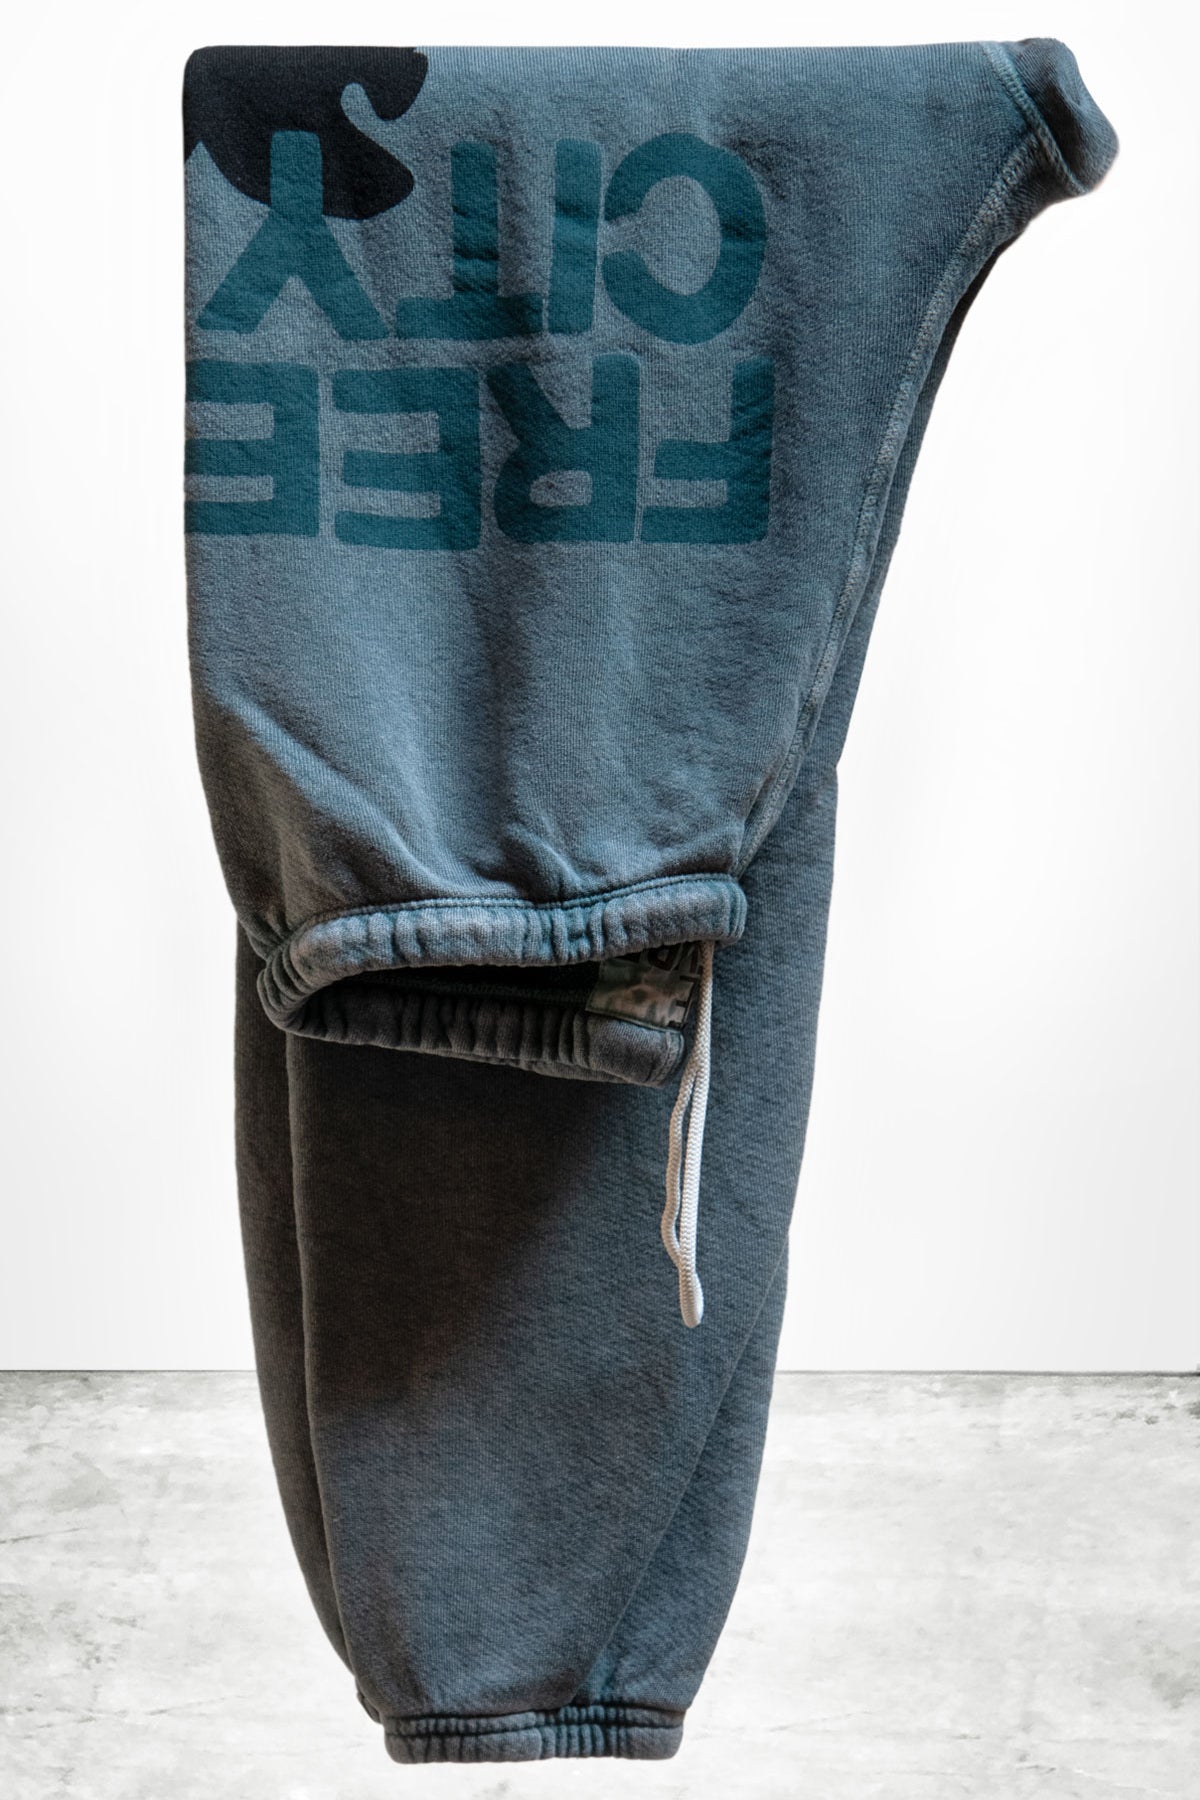 Sweatpants brands - free city wsly monrow lett and aviator nation